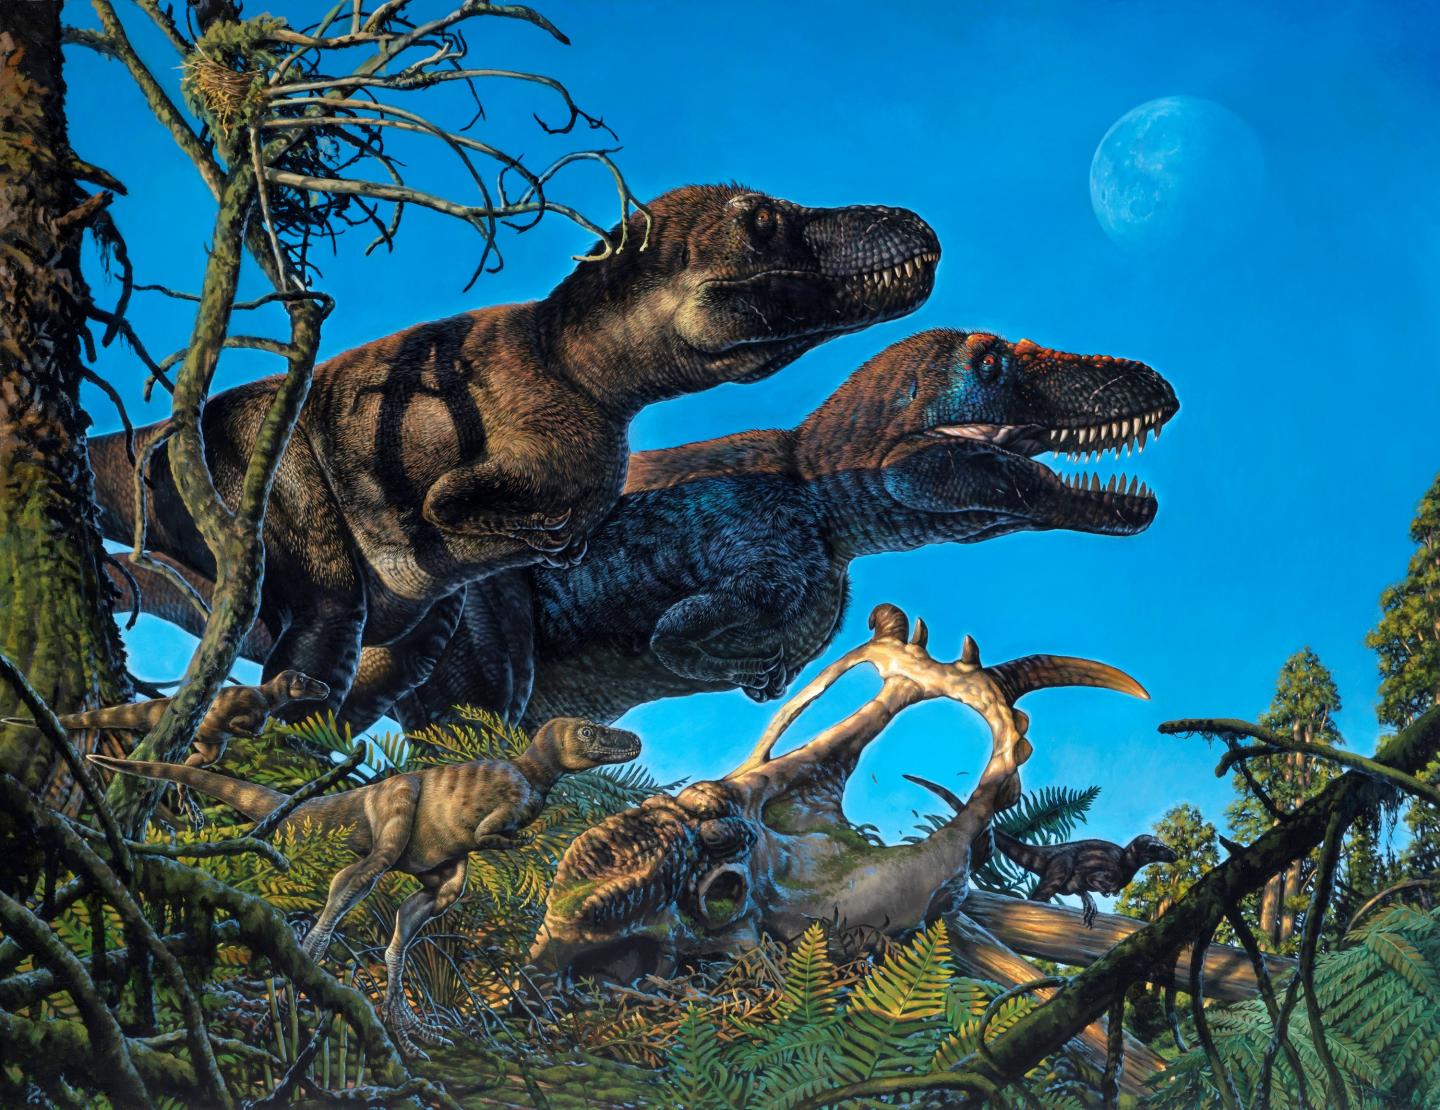 Dinos probably liked the colder weather a lot more than scientists once predicted.